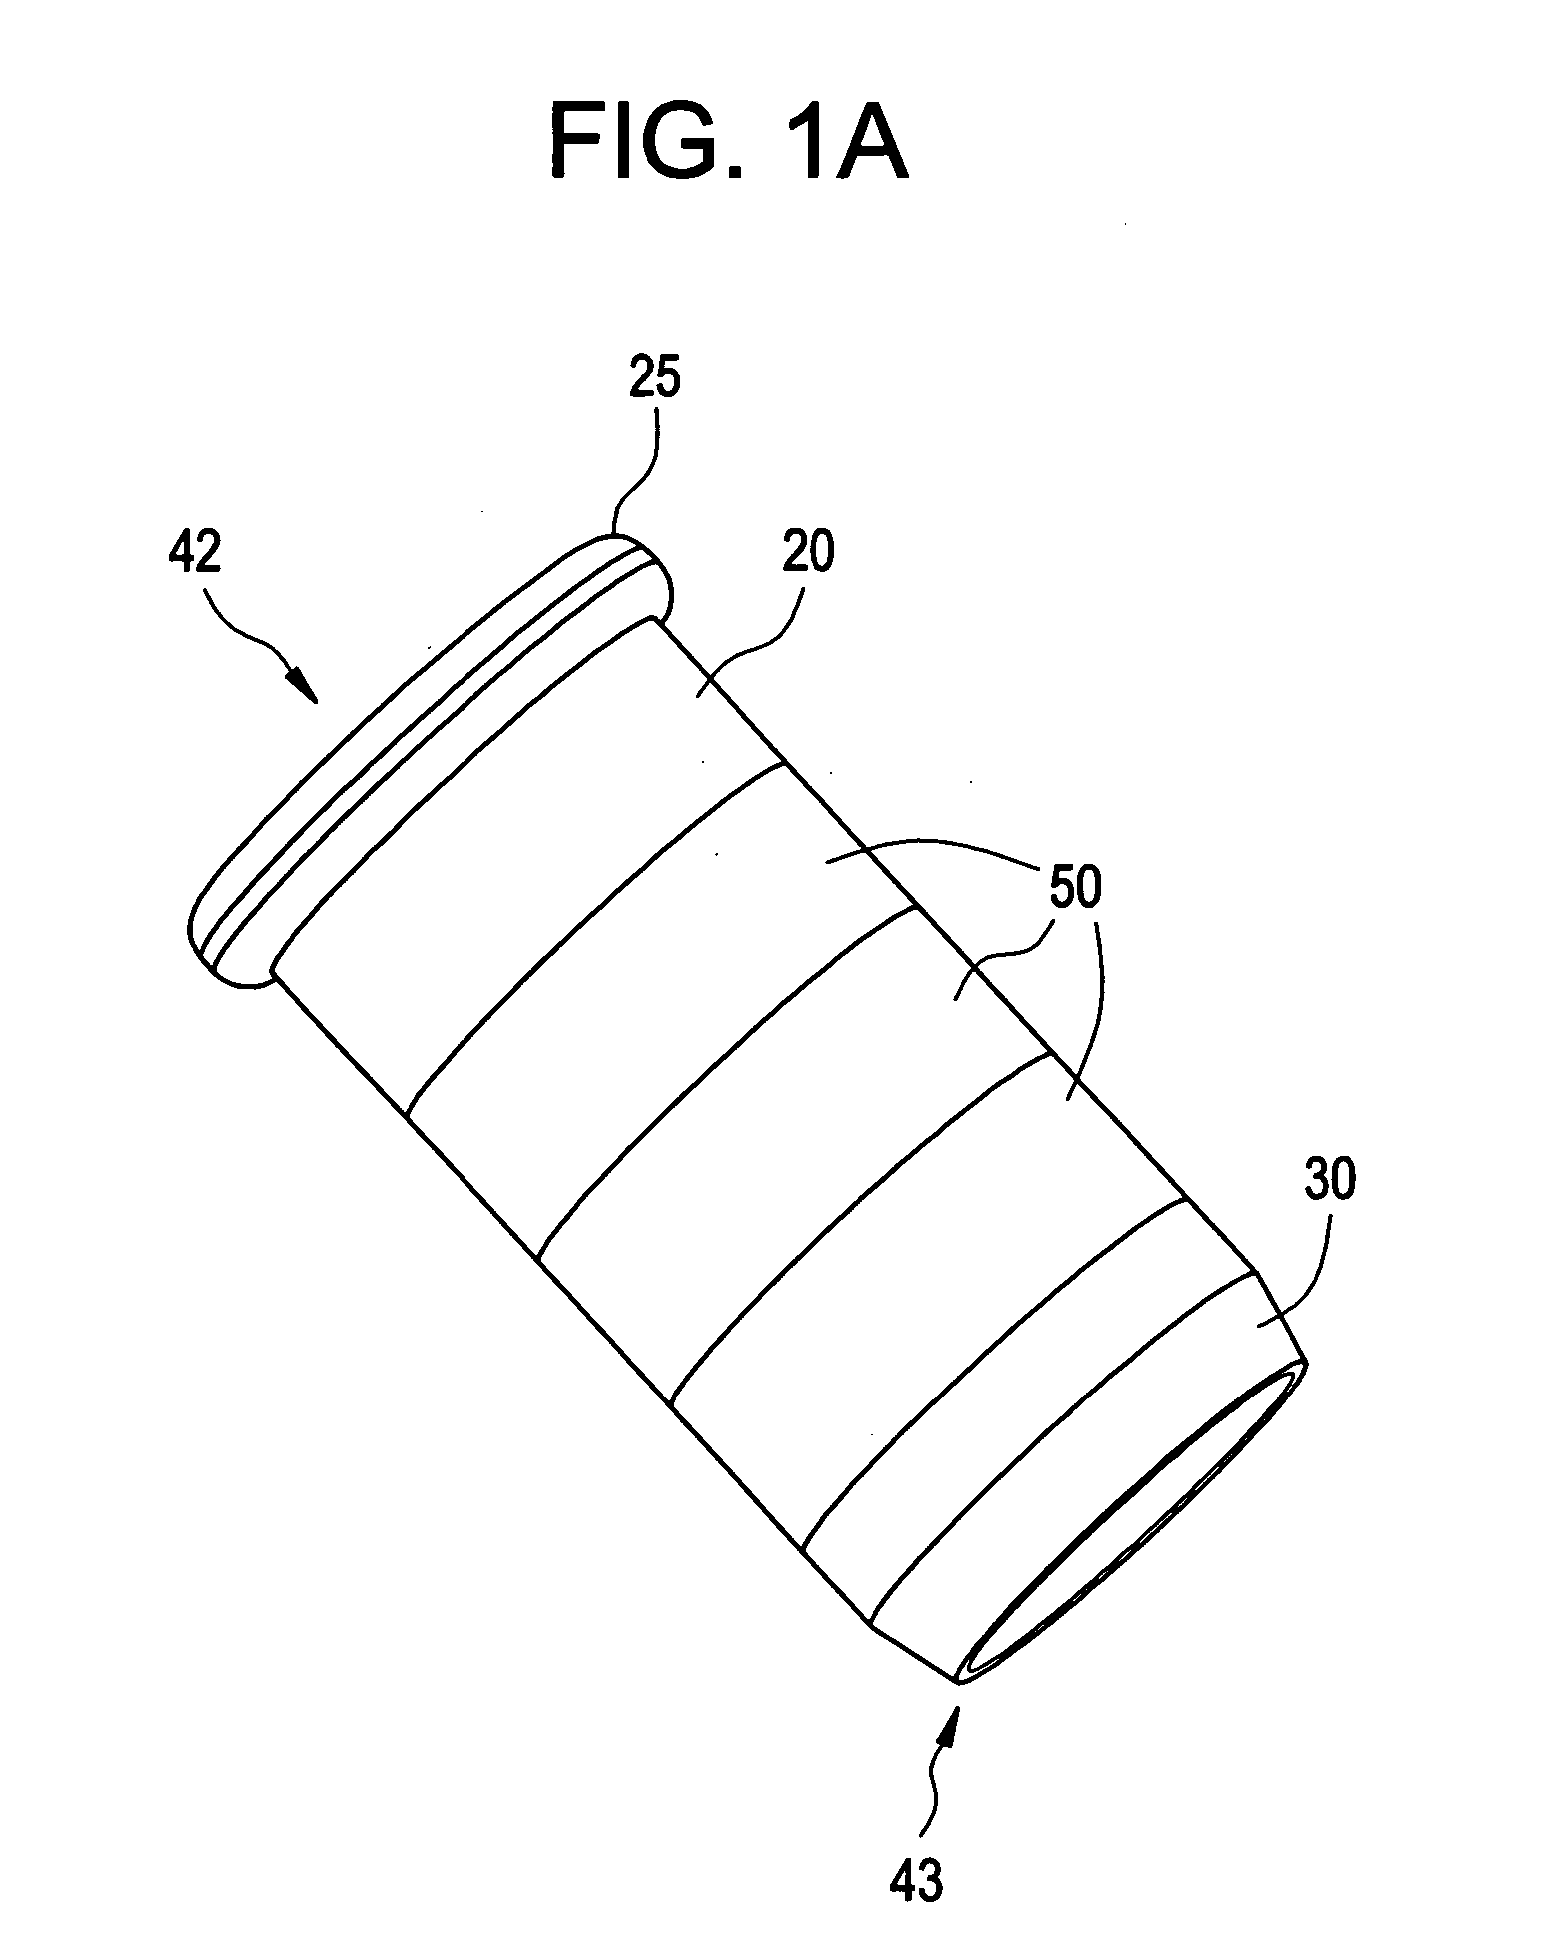 Adjustable access device for surgical procedures